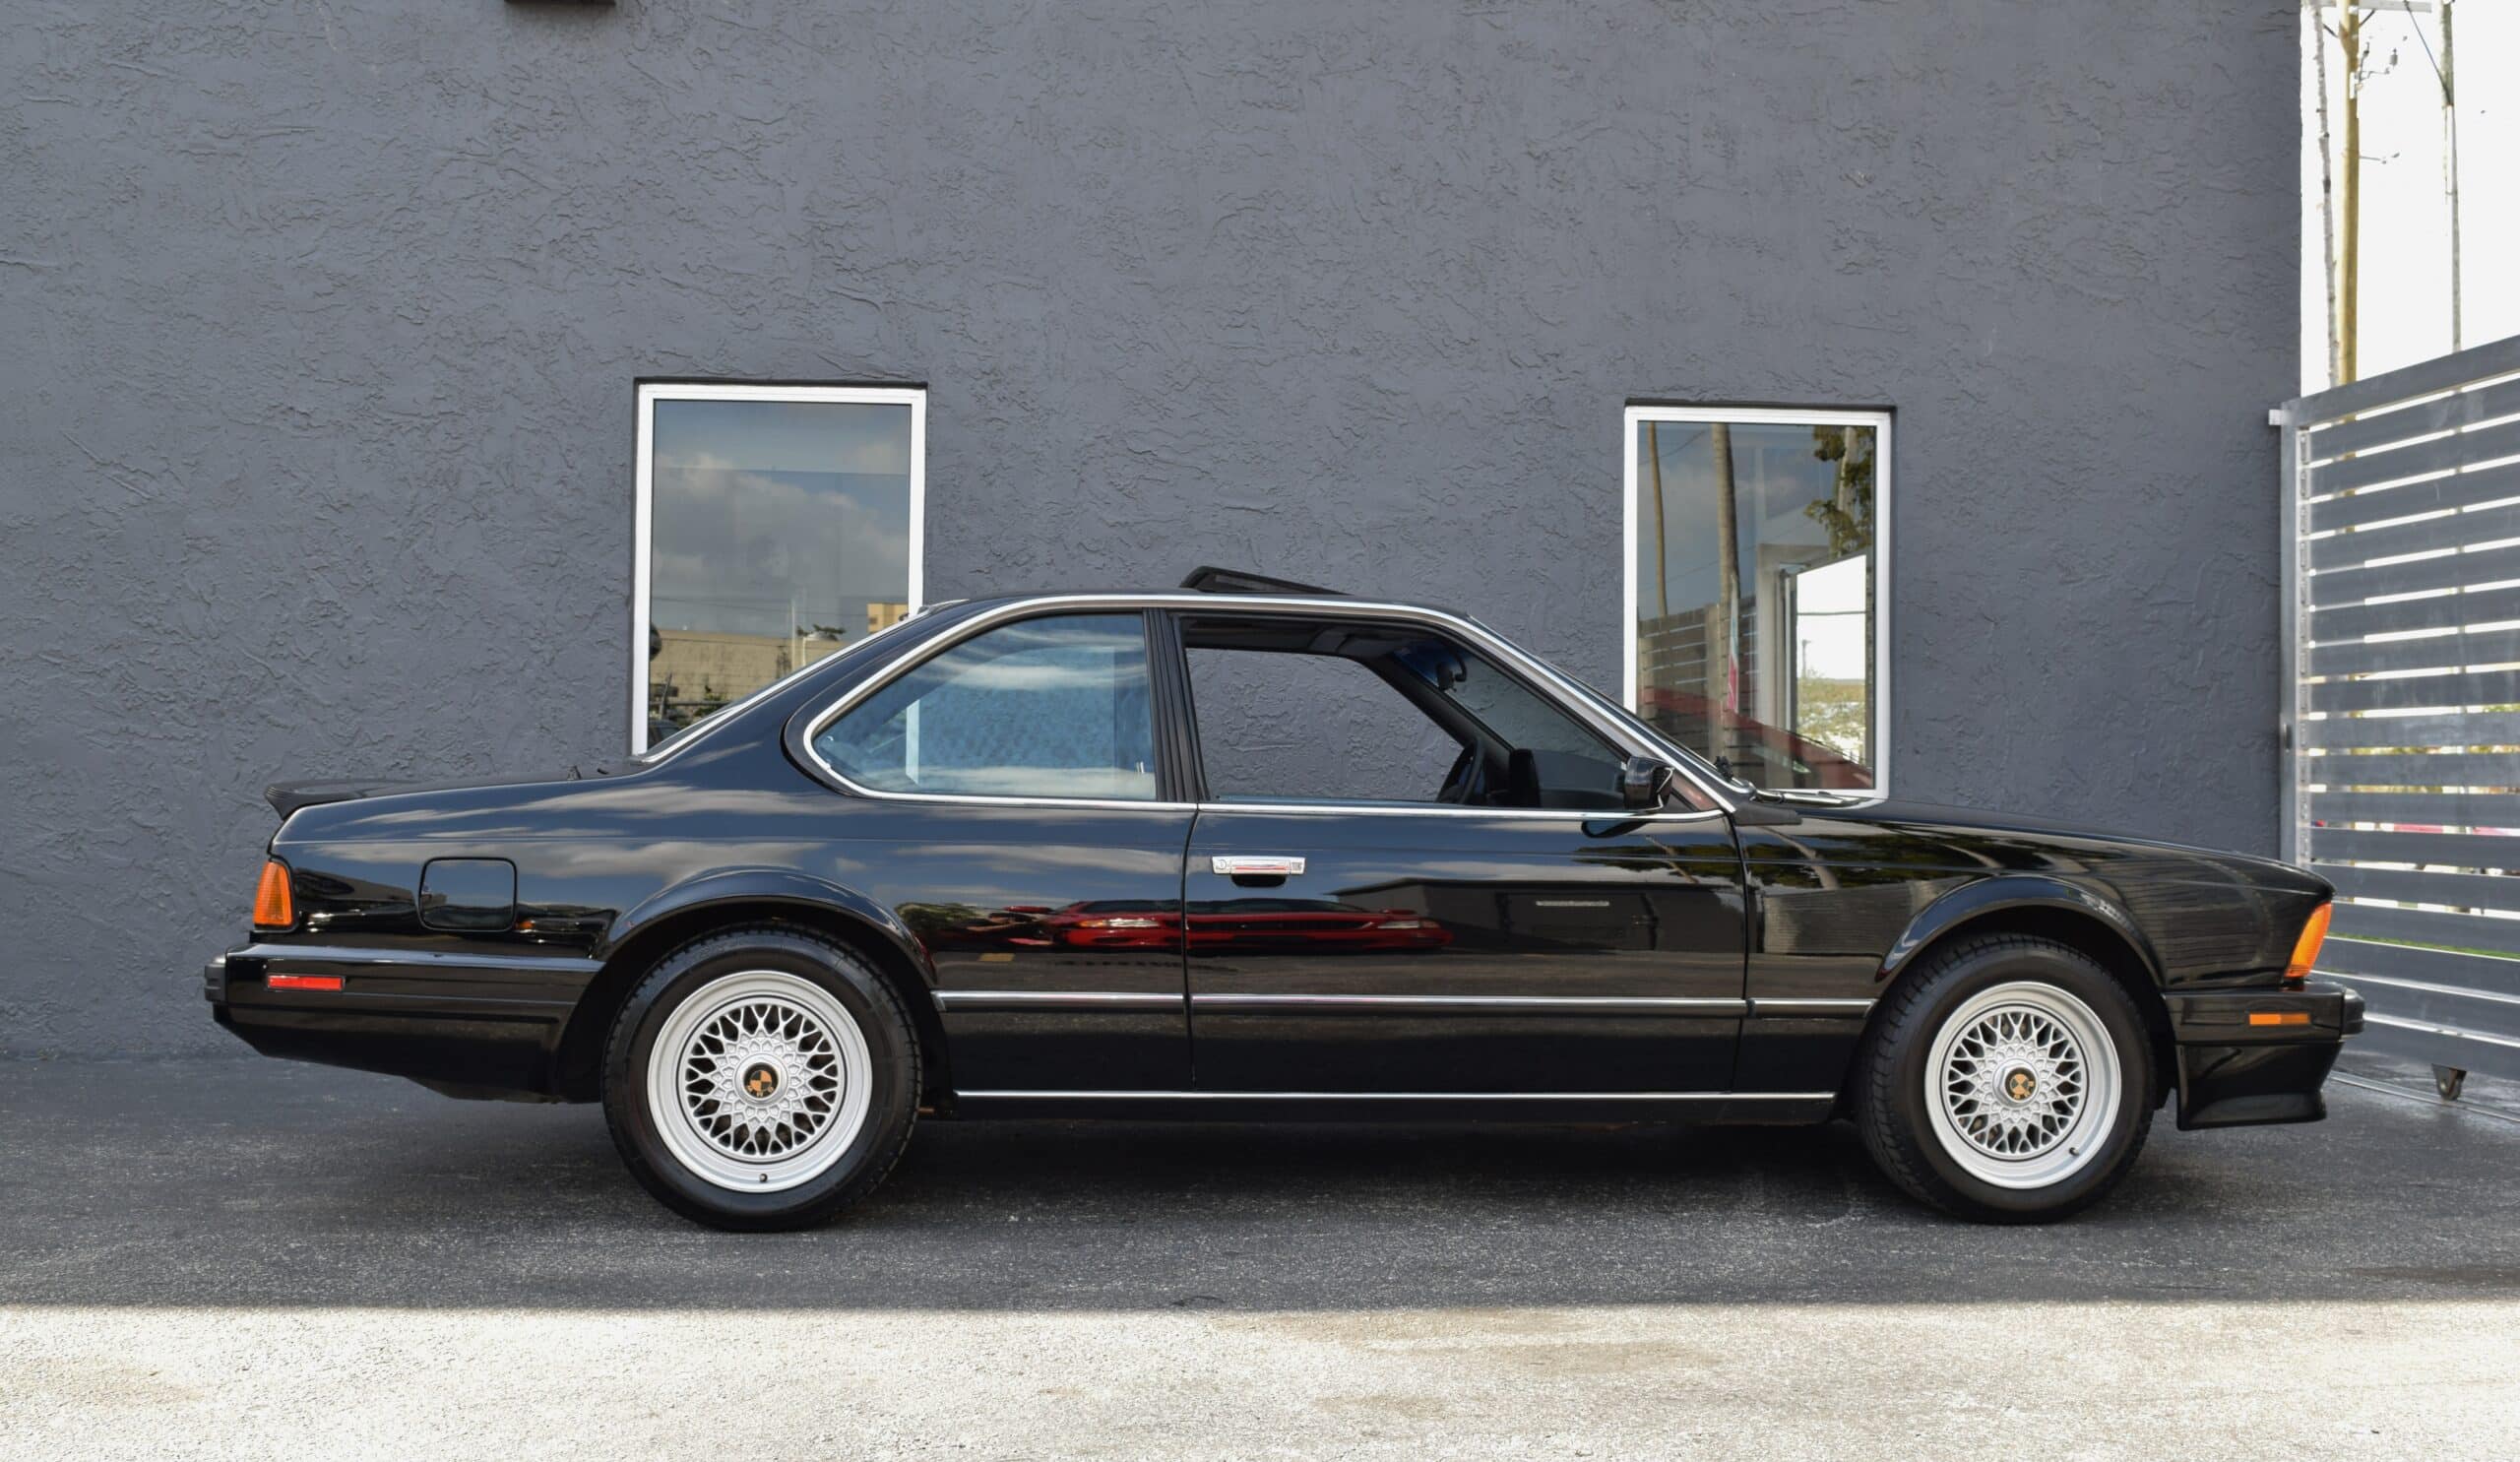 1988 BMW M6 E24 Excellent condition inside & out Service Records From New-Recent Full Service-